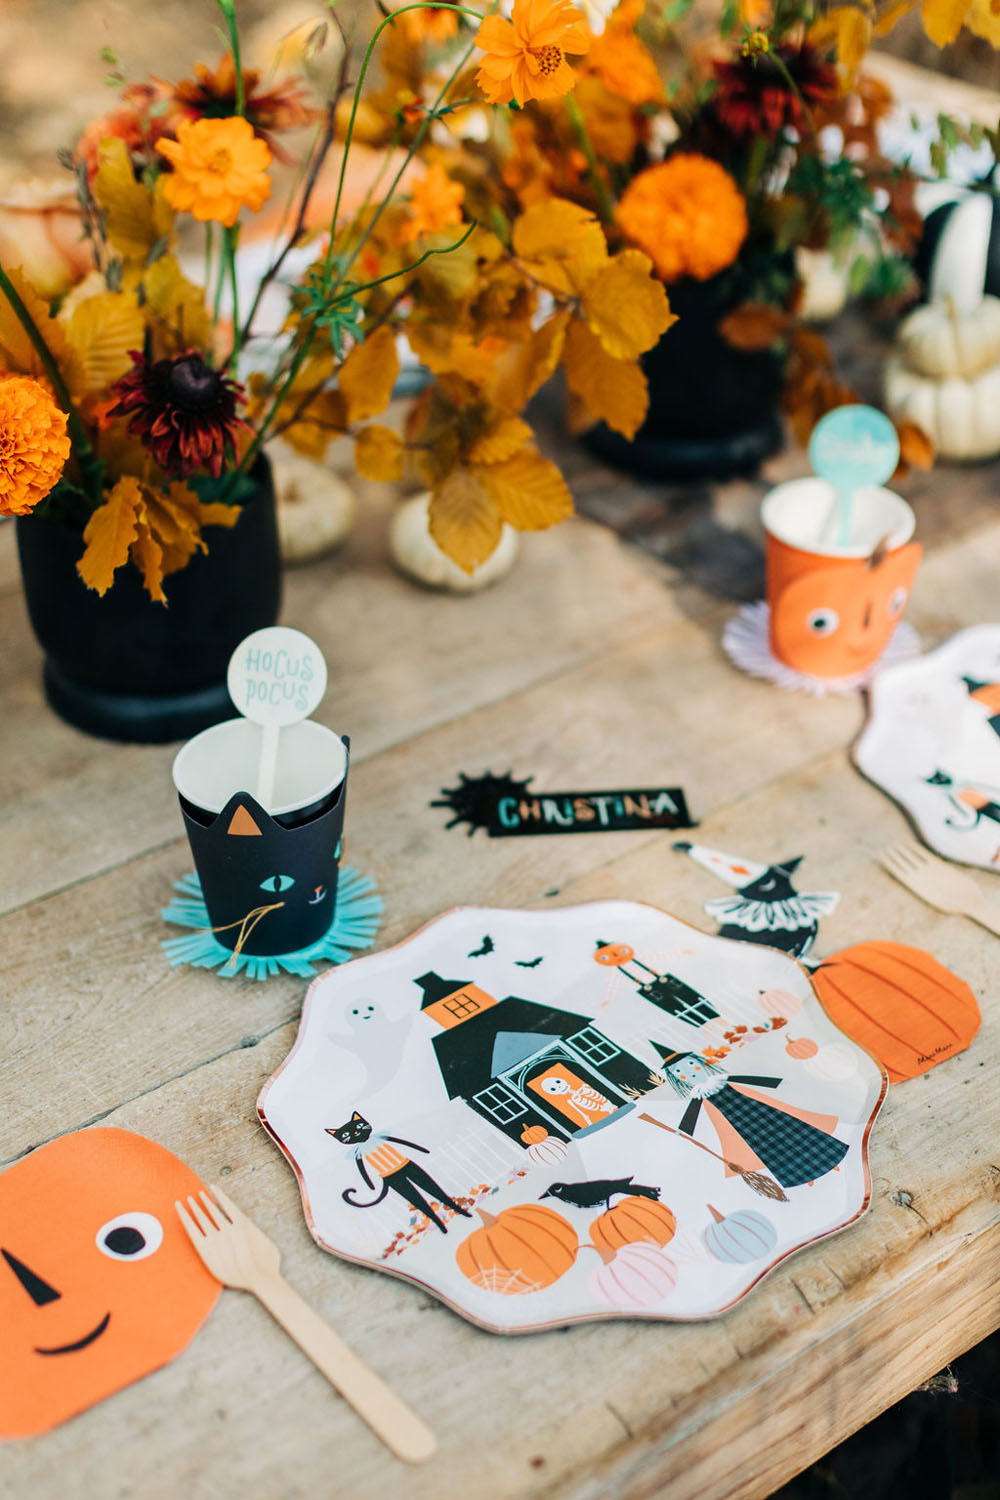 A kids' vintage inspired Halloween party from Beijos Events